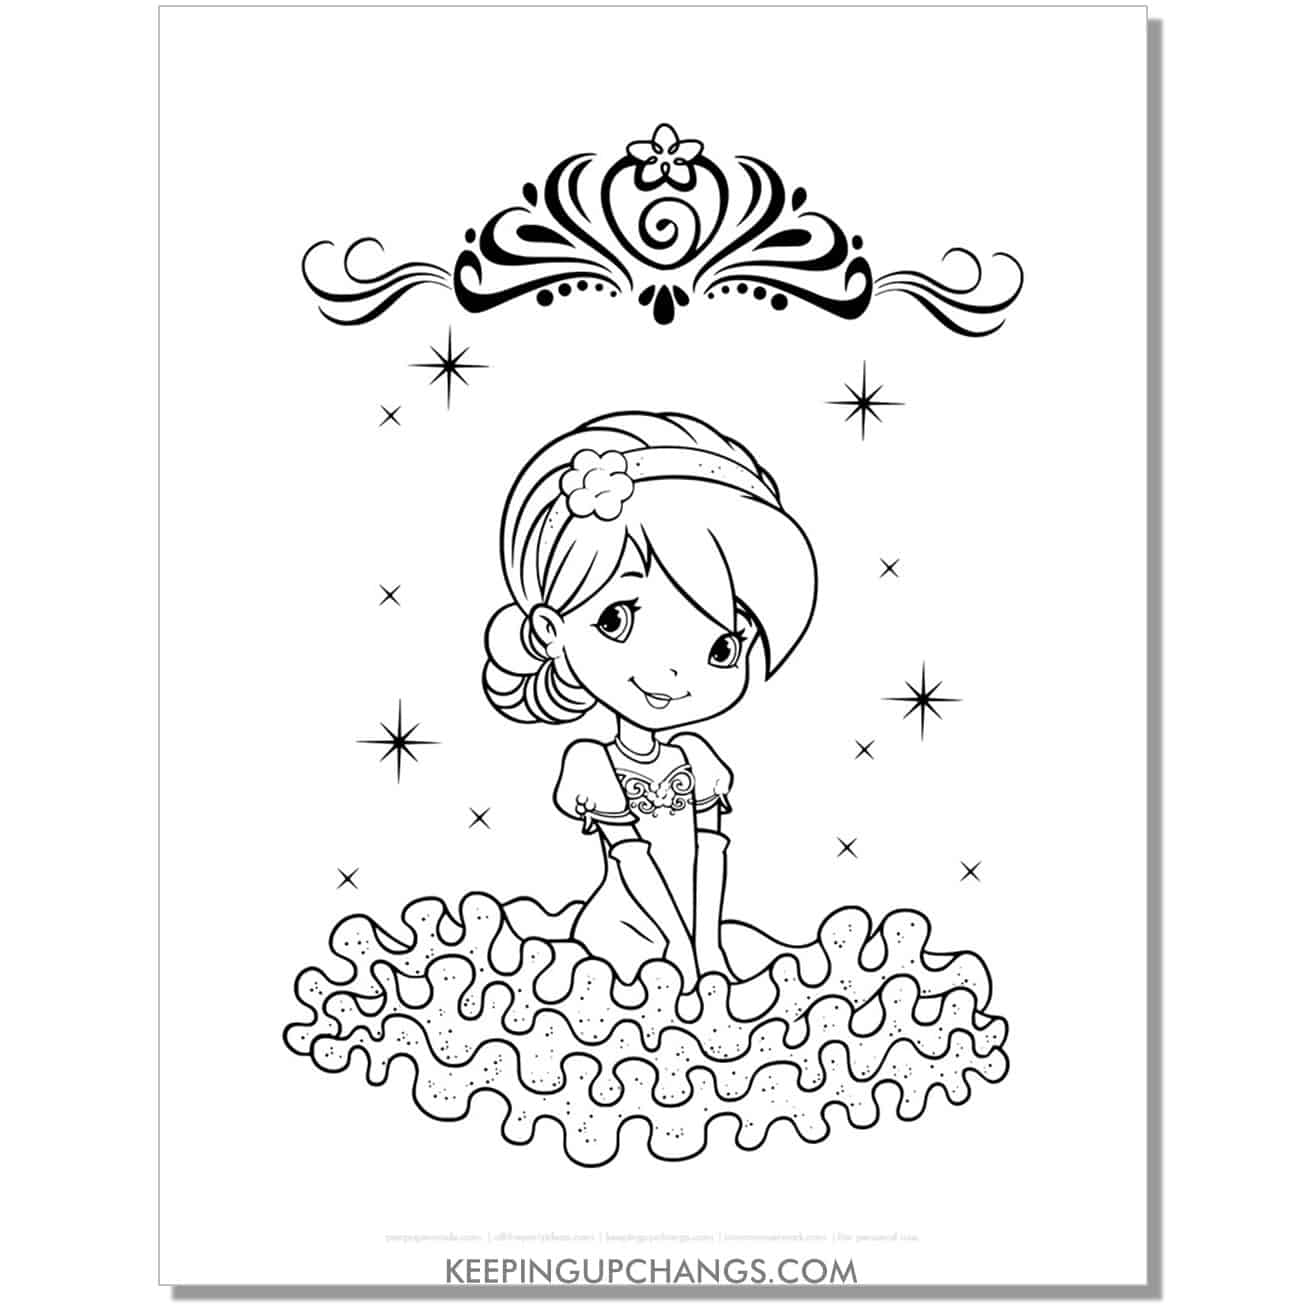 free strawberry shortcake with glittery stars coloring page, sheet.